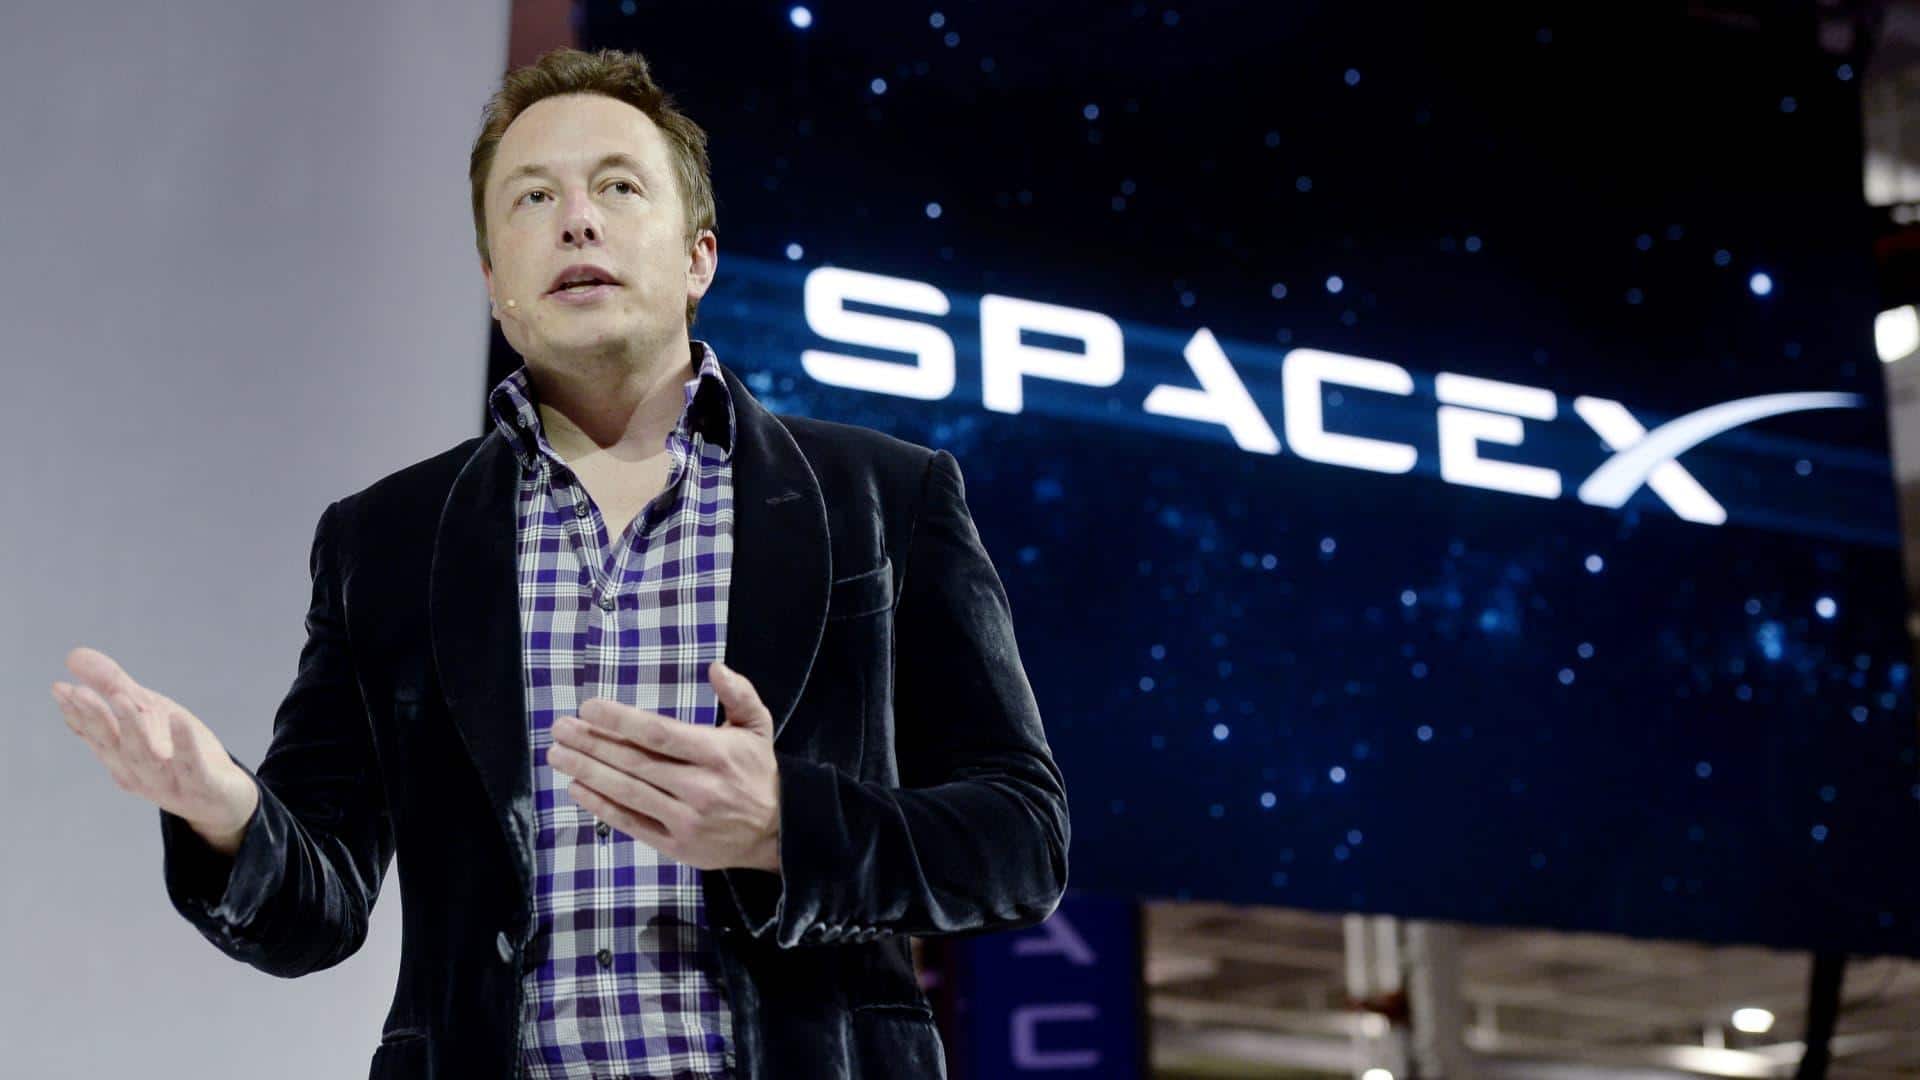 Elon Musk dismisses theories of alien involvement in MH370 disappearance